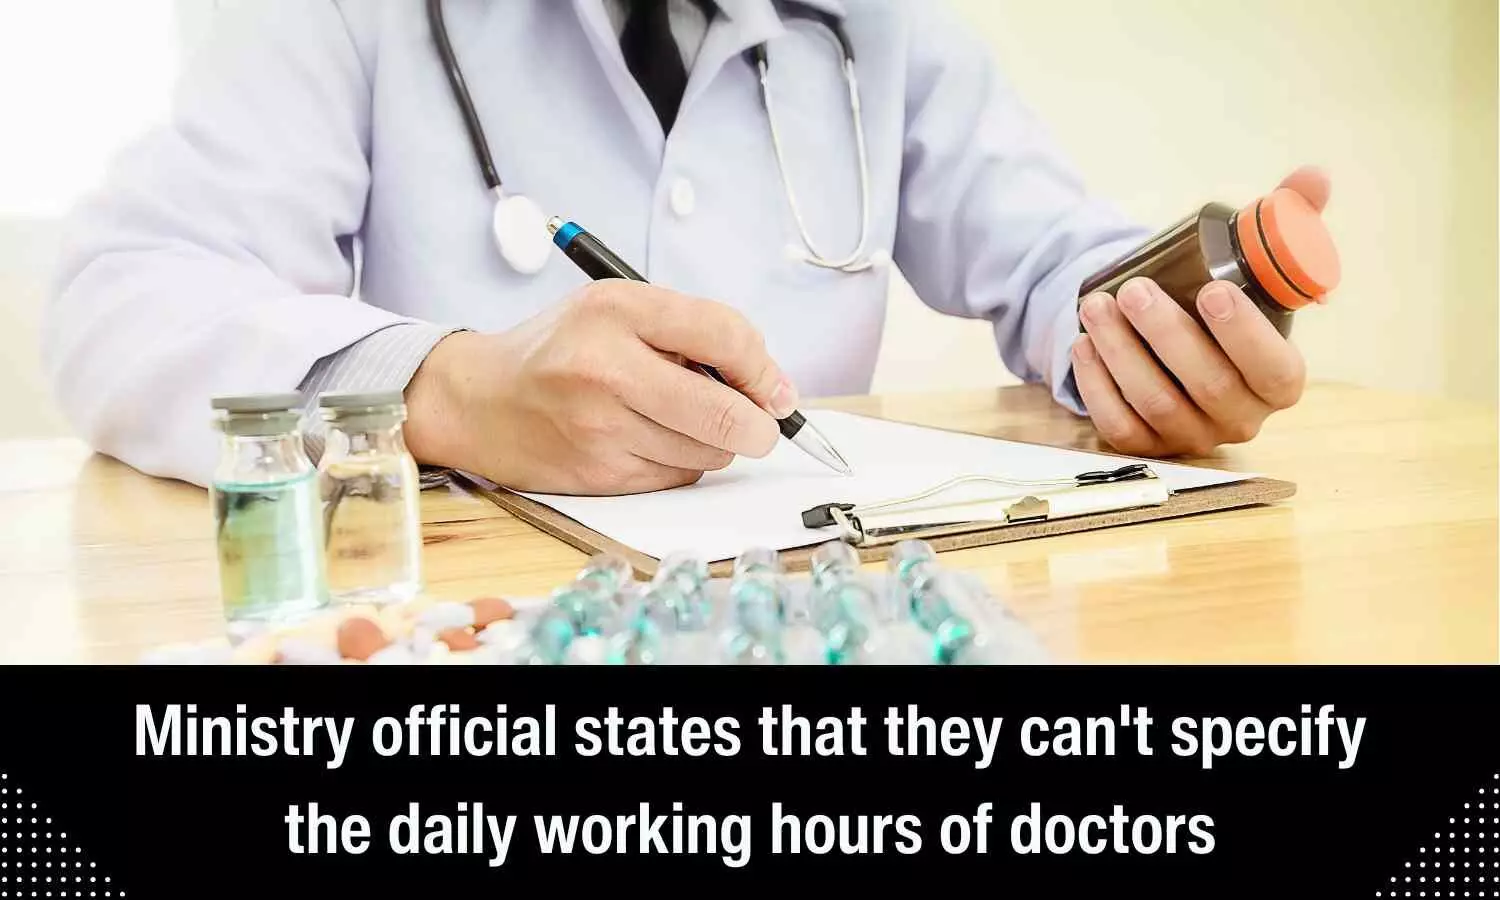 Cant specify the daily working hours of doctors: Ministry official